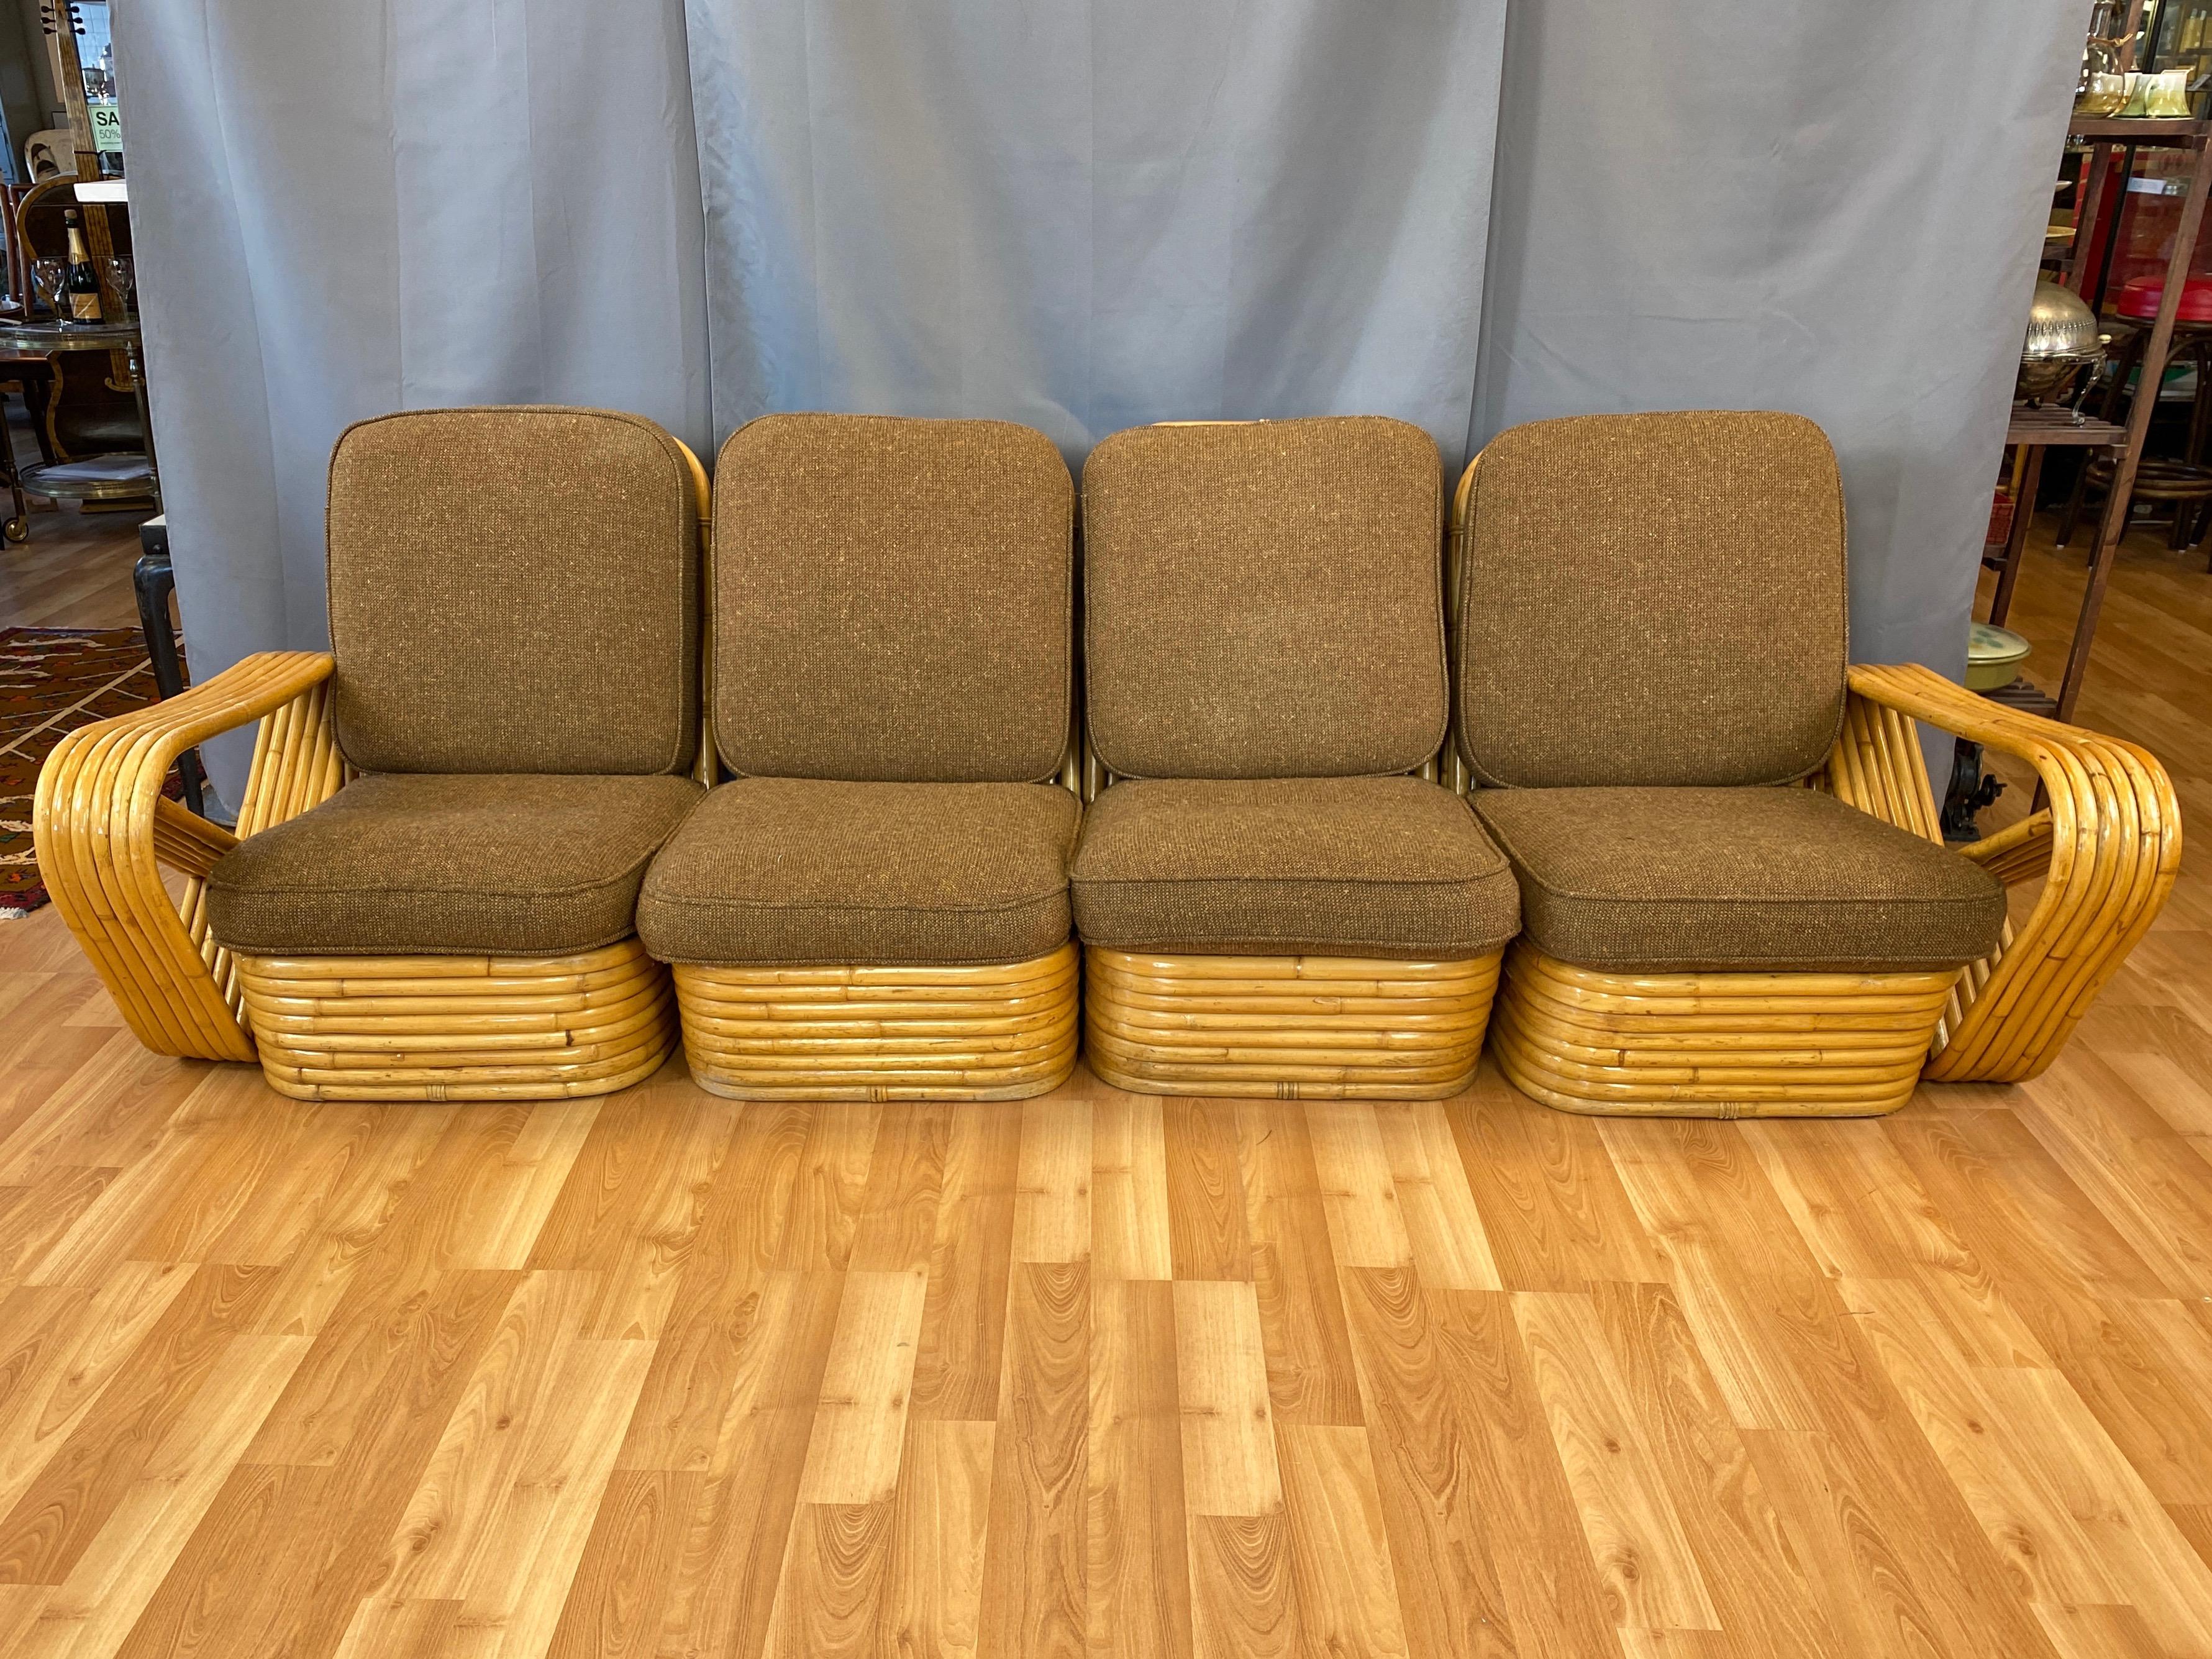 An impressive mid-century Paul Frankl-style rattan four-seat sectional pretzel sofa, with production attributed to Tropical Sun Co. of Pasadena, California.

Expertly-crafted bent rattan four-piece modular sofa notable for six-strand arms with